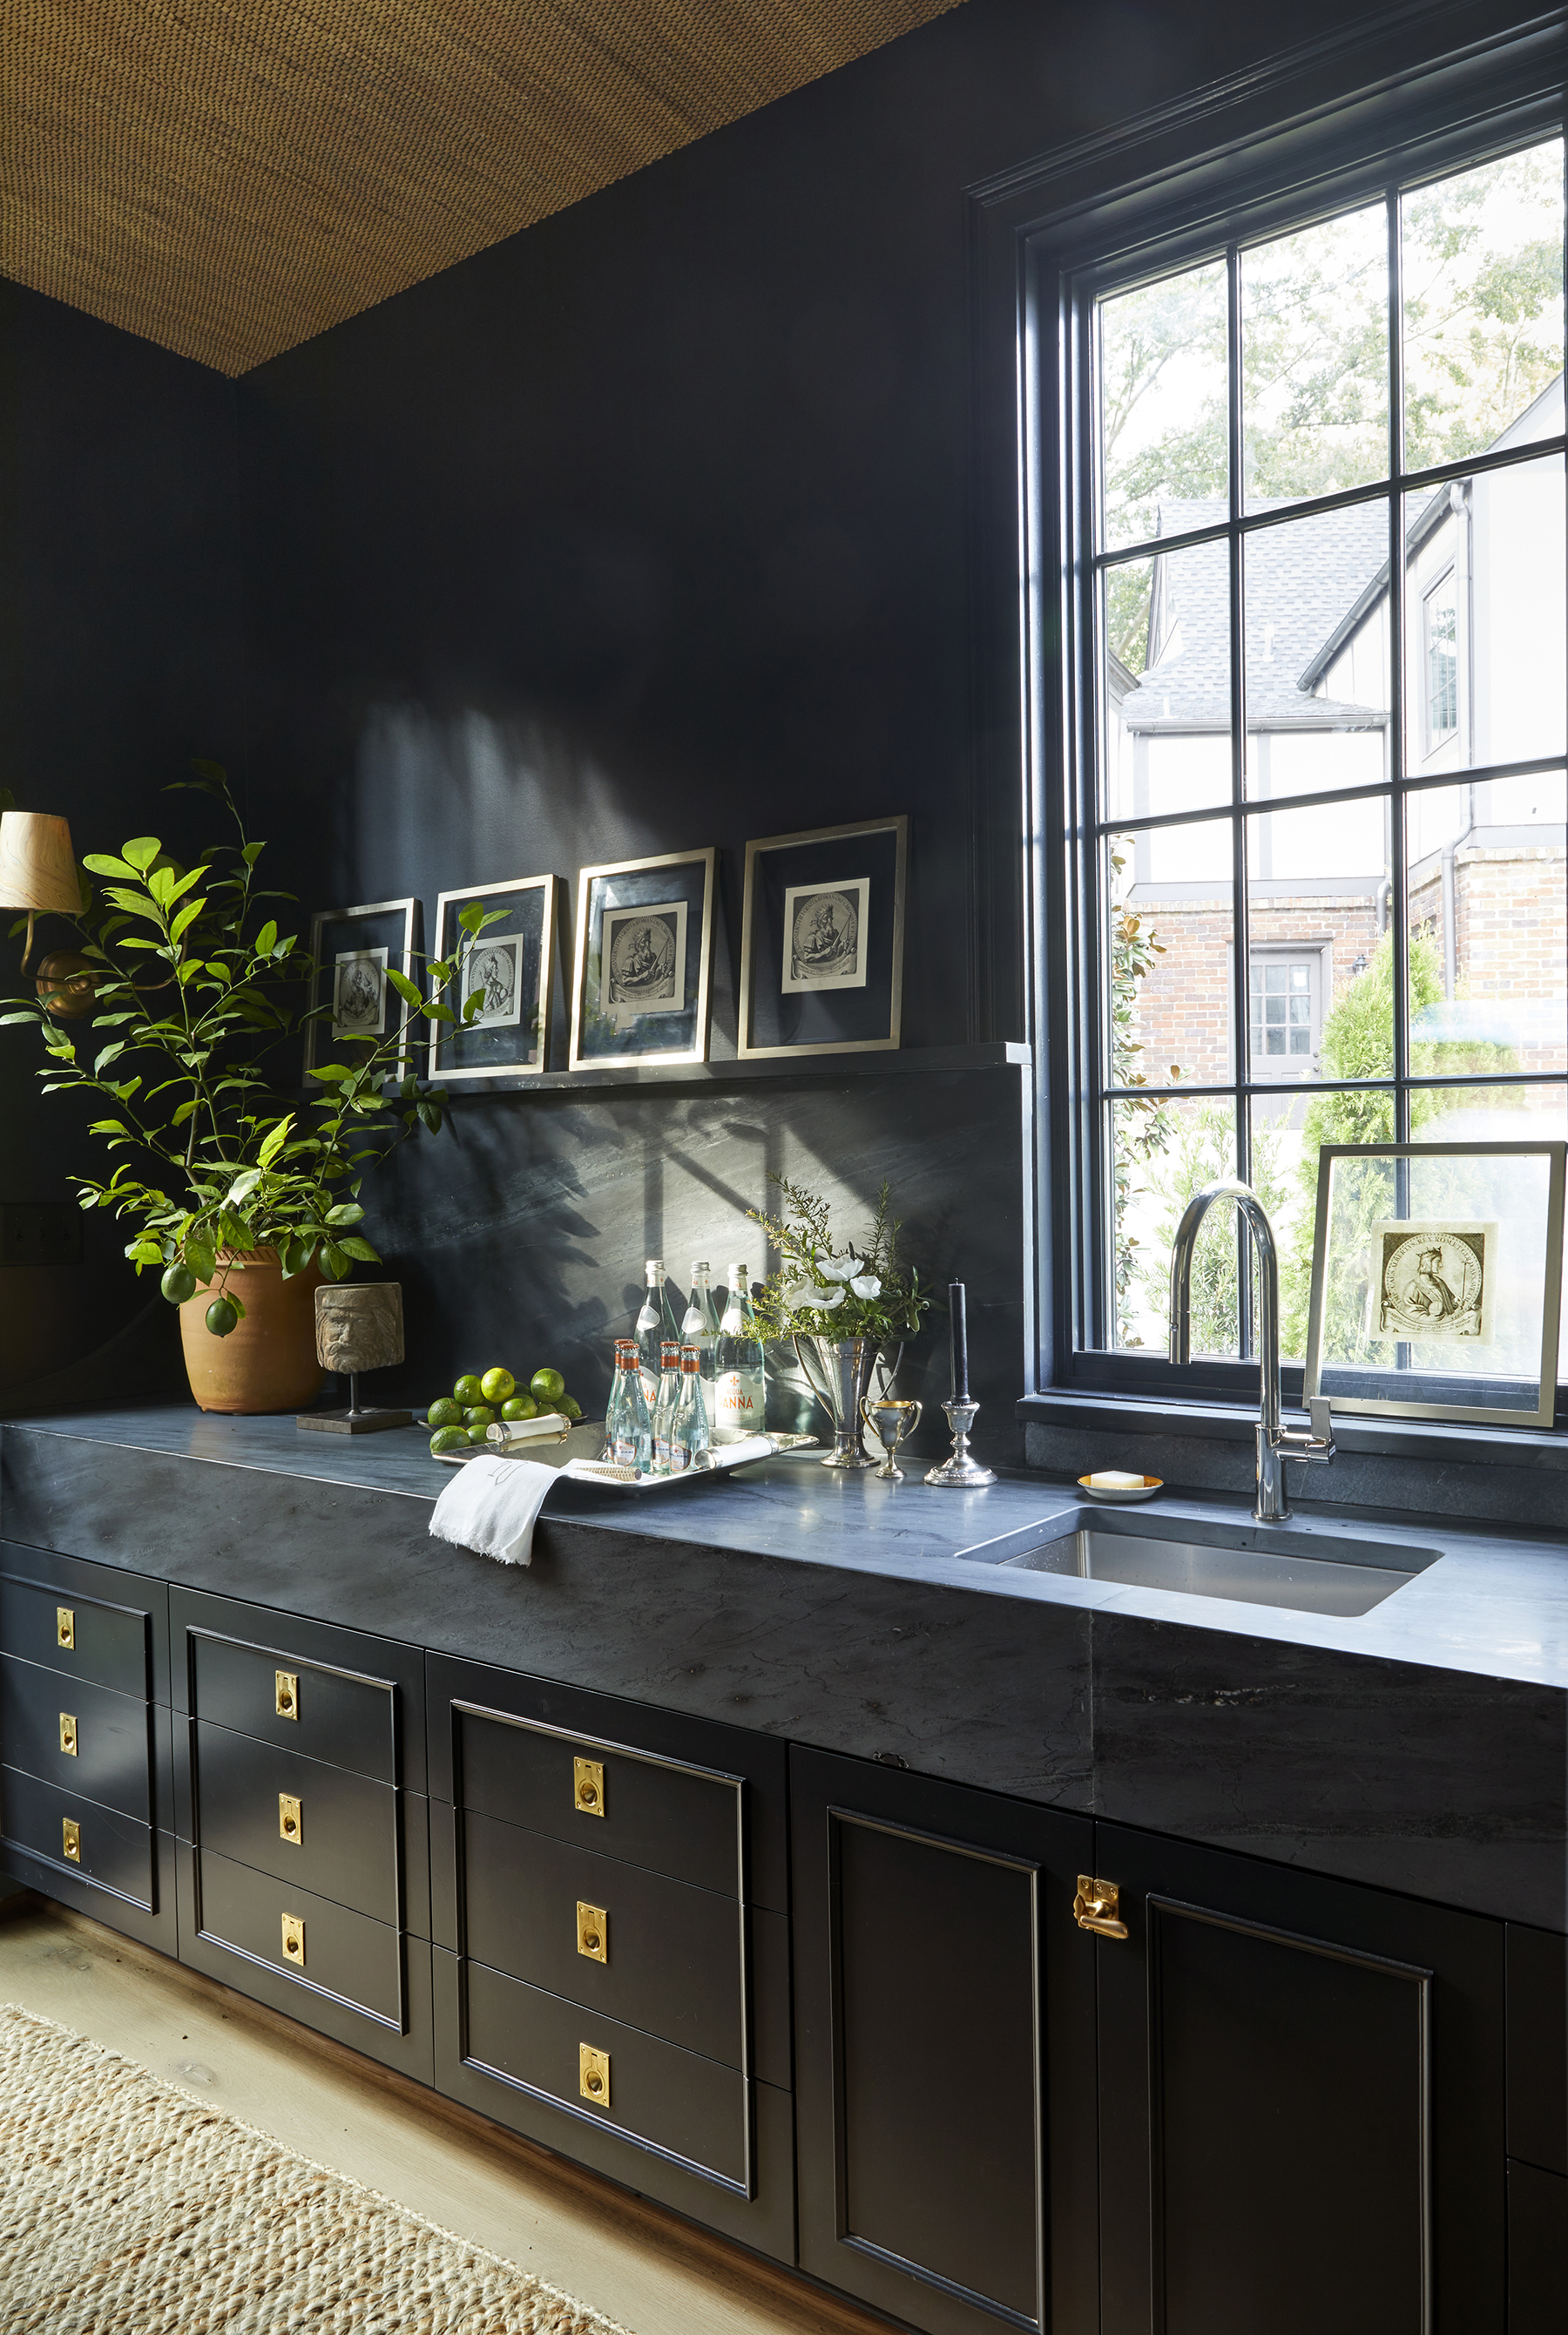 Wet bar painted black from the 2022 Birmingham Home & Garden story "The Colors Birmingham Loves."